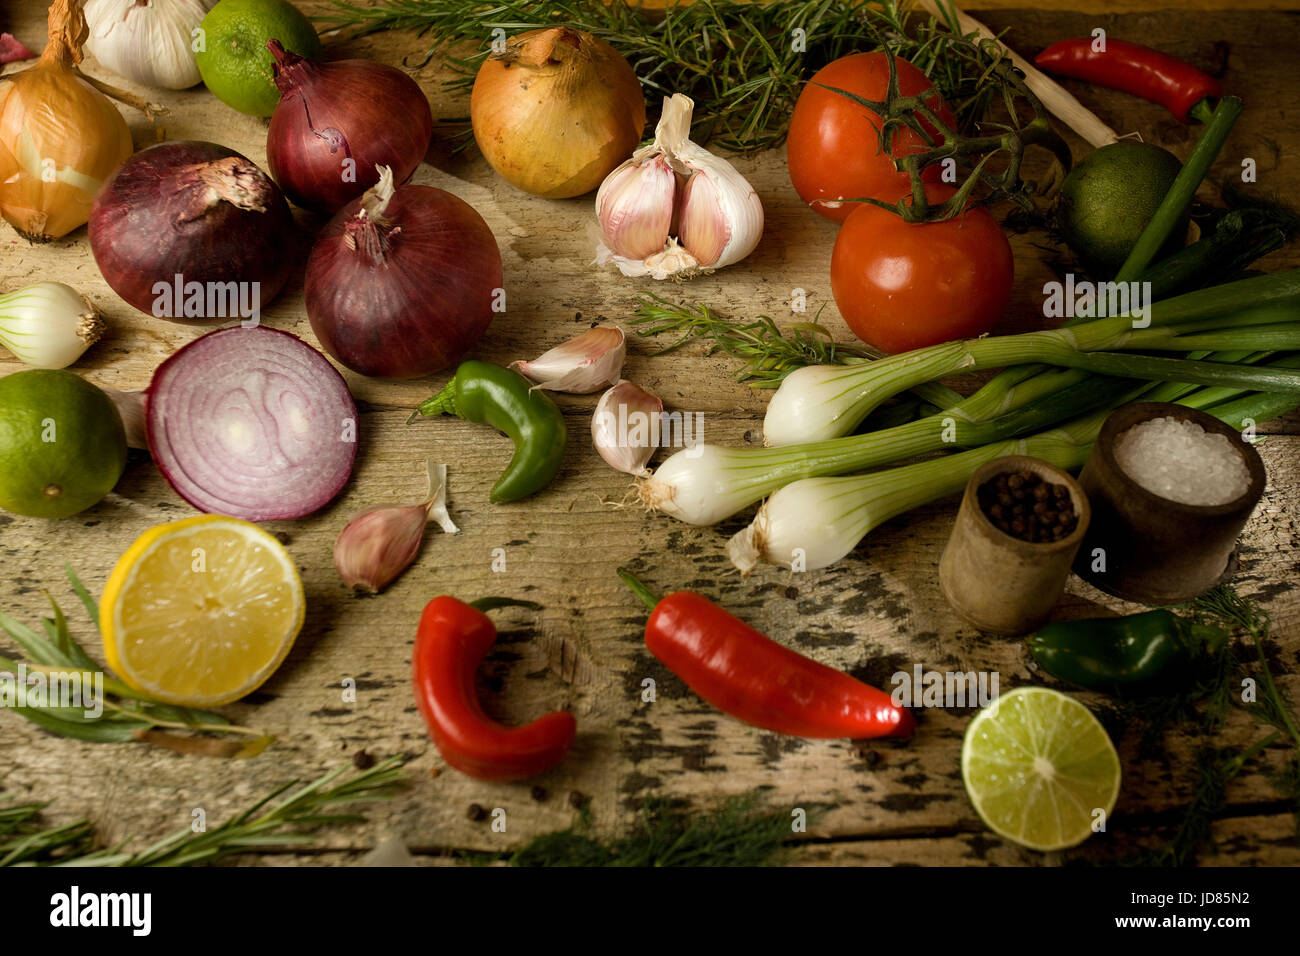 whole and sliced vegetables herbs and spices still life Stock Photo